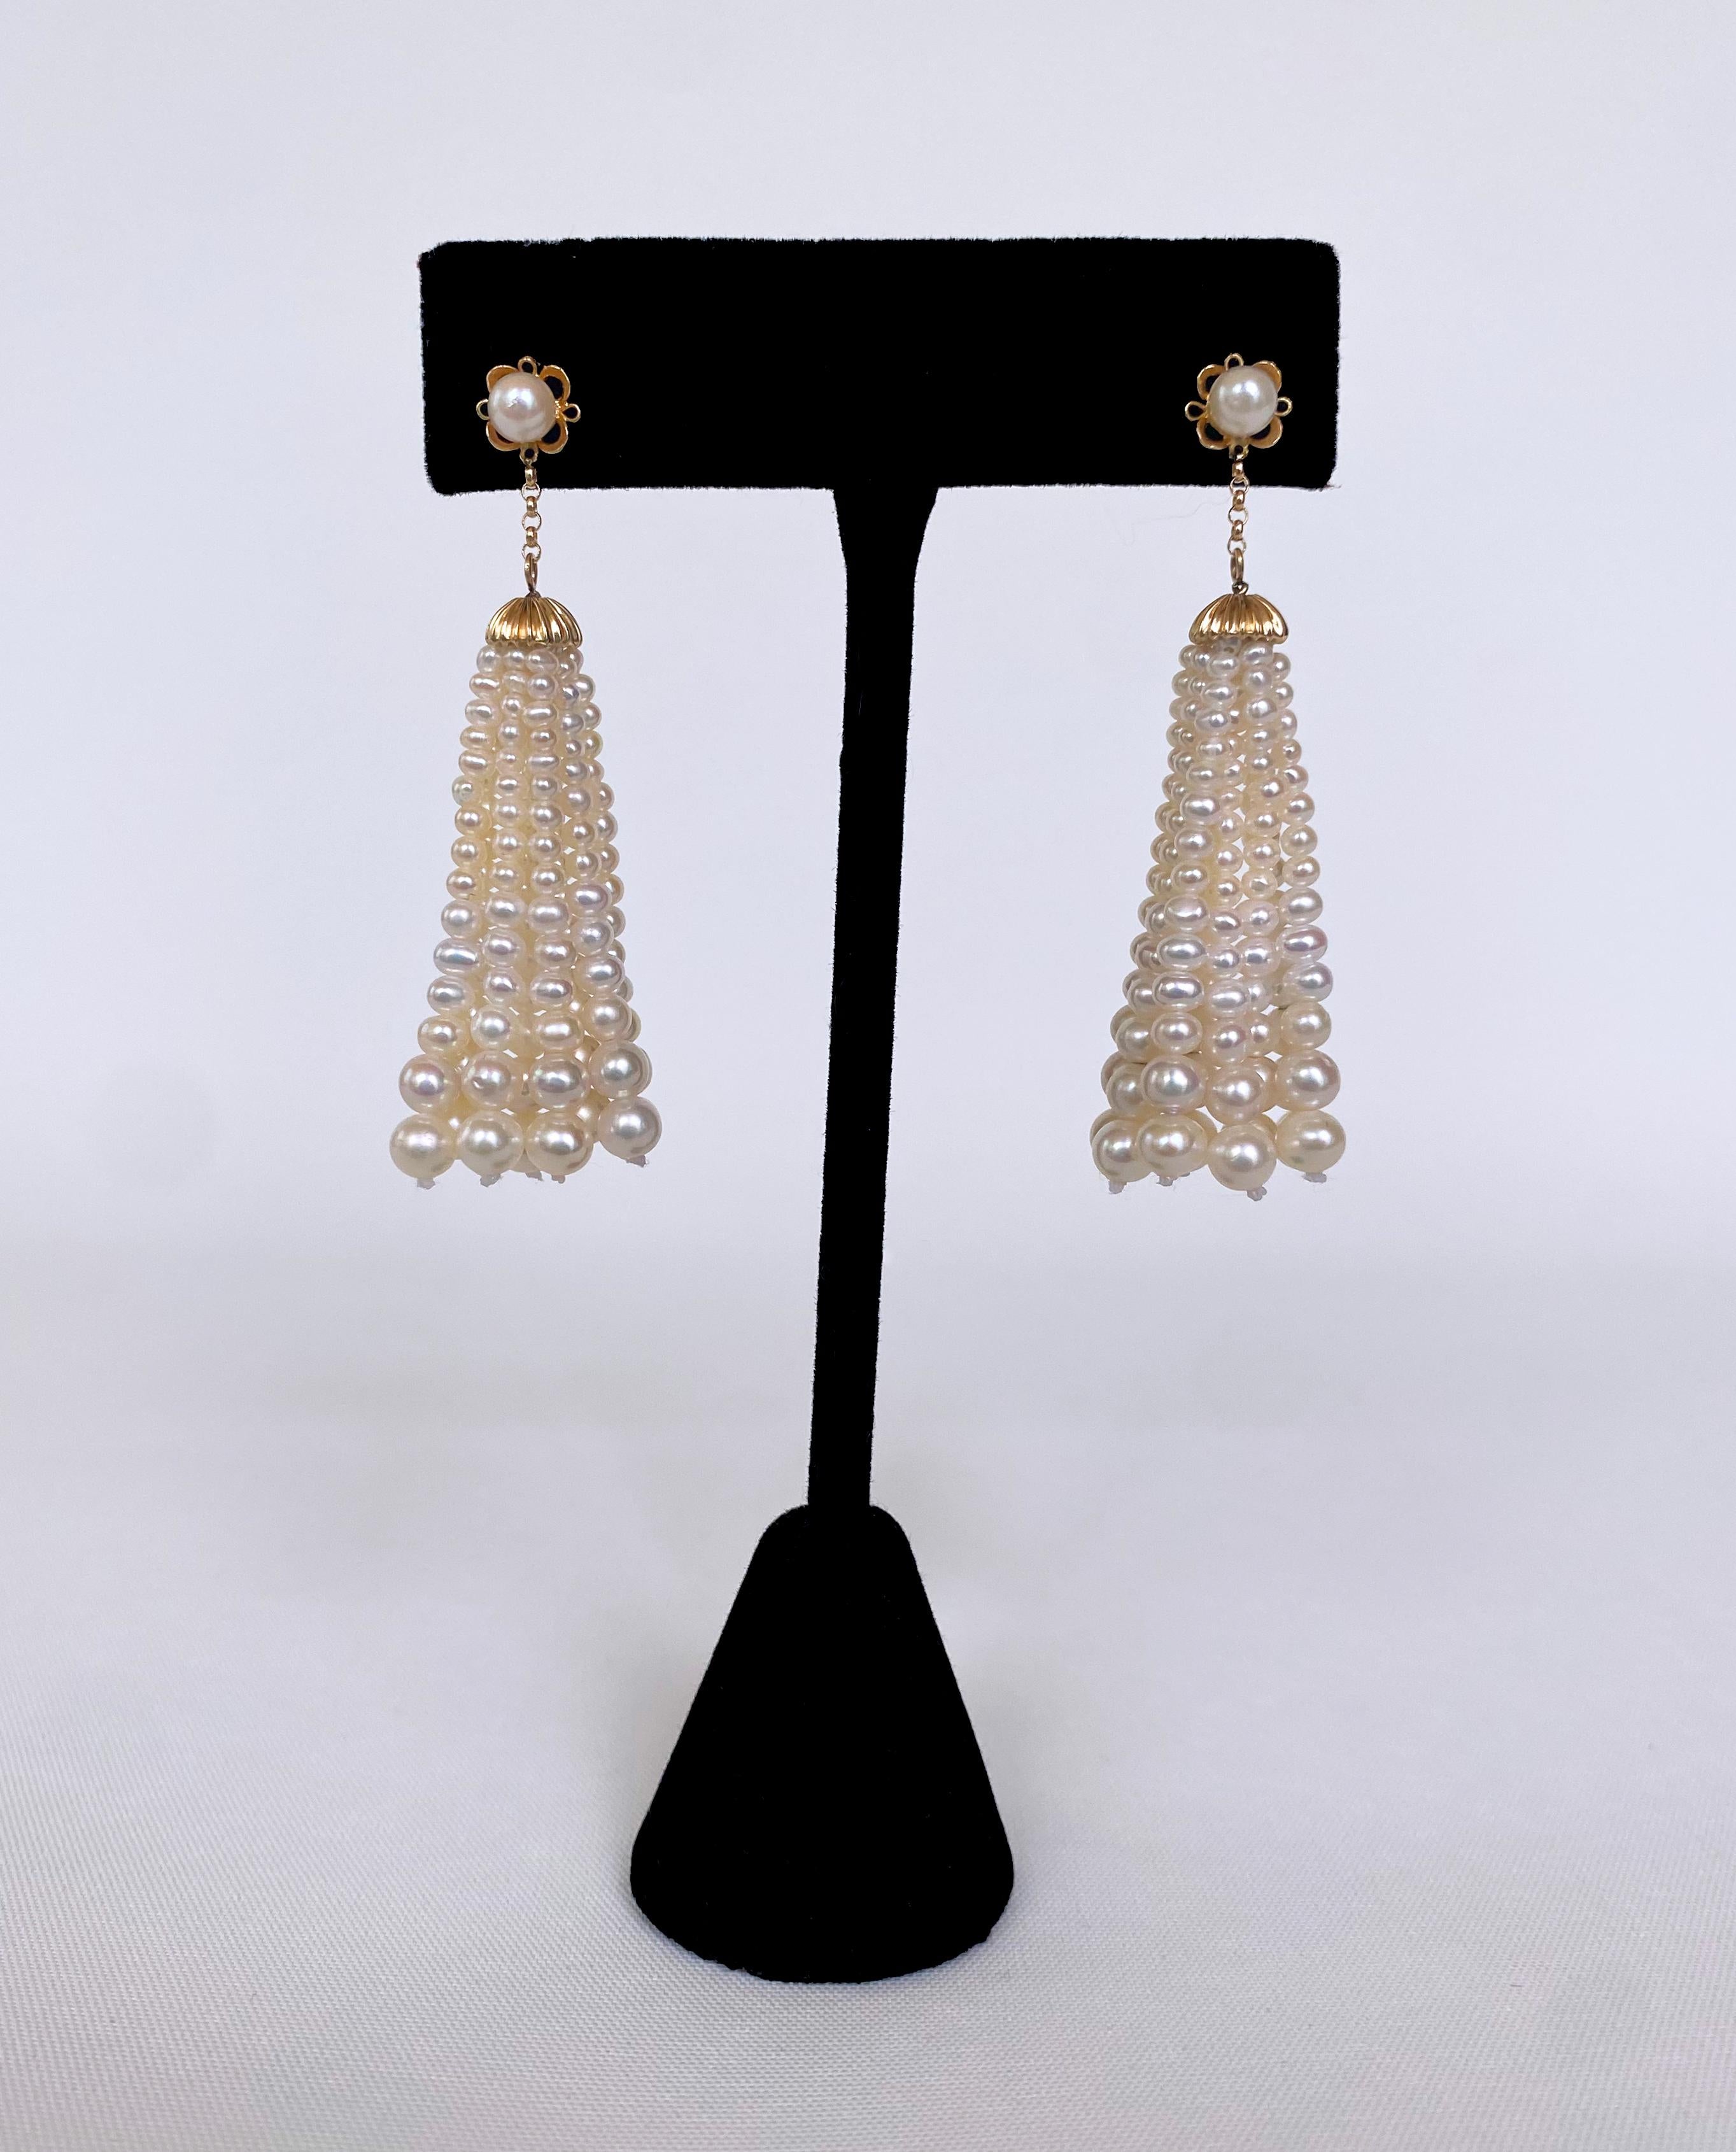 Artisan Marina J. Graduated Pearl and Solid 14k Yellow Gold Tassel Earrings For Sale